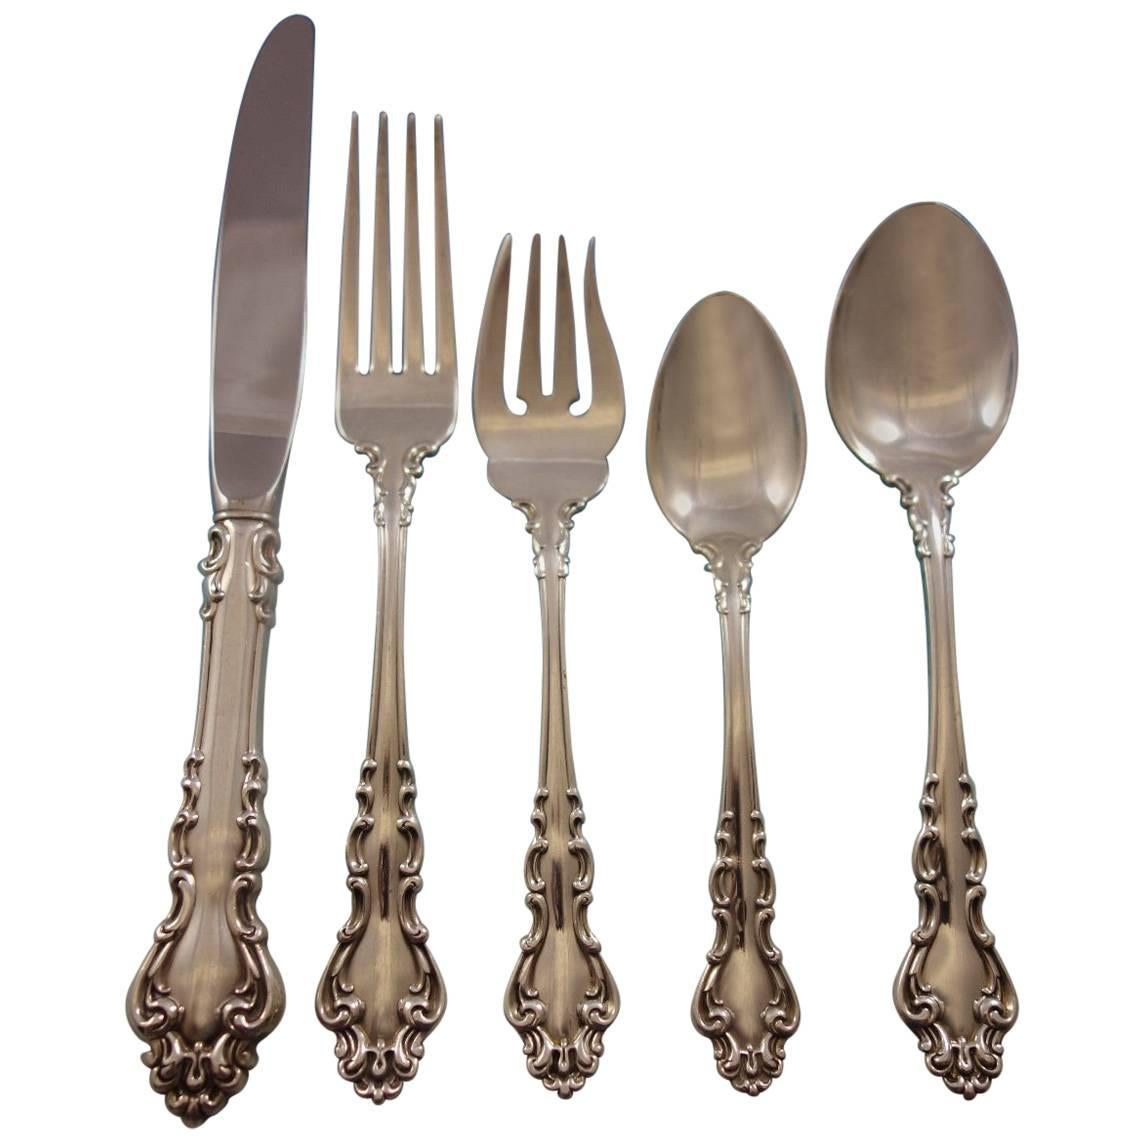 Spanish Baroque by Reed & Barton Sterling Silver Flatware Set 8 Service 45 Pcs